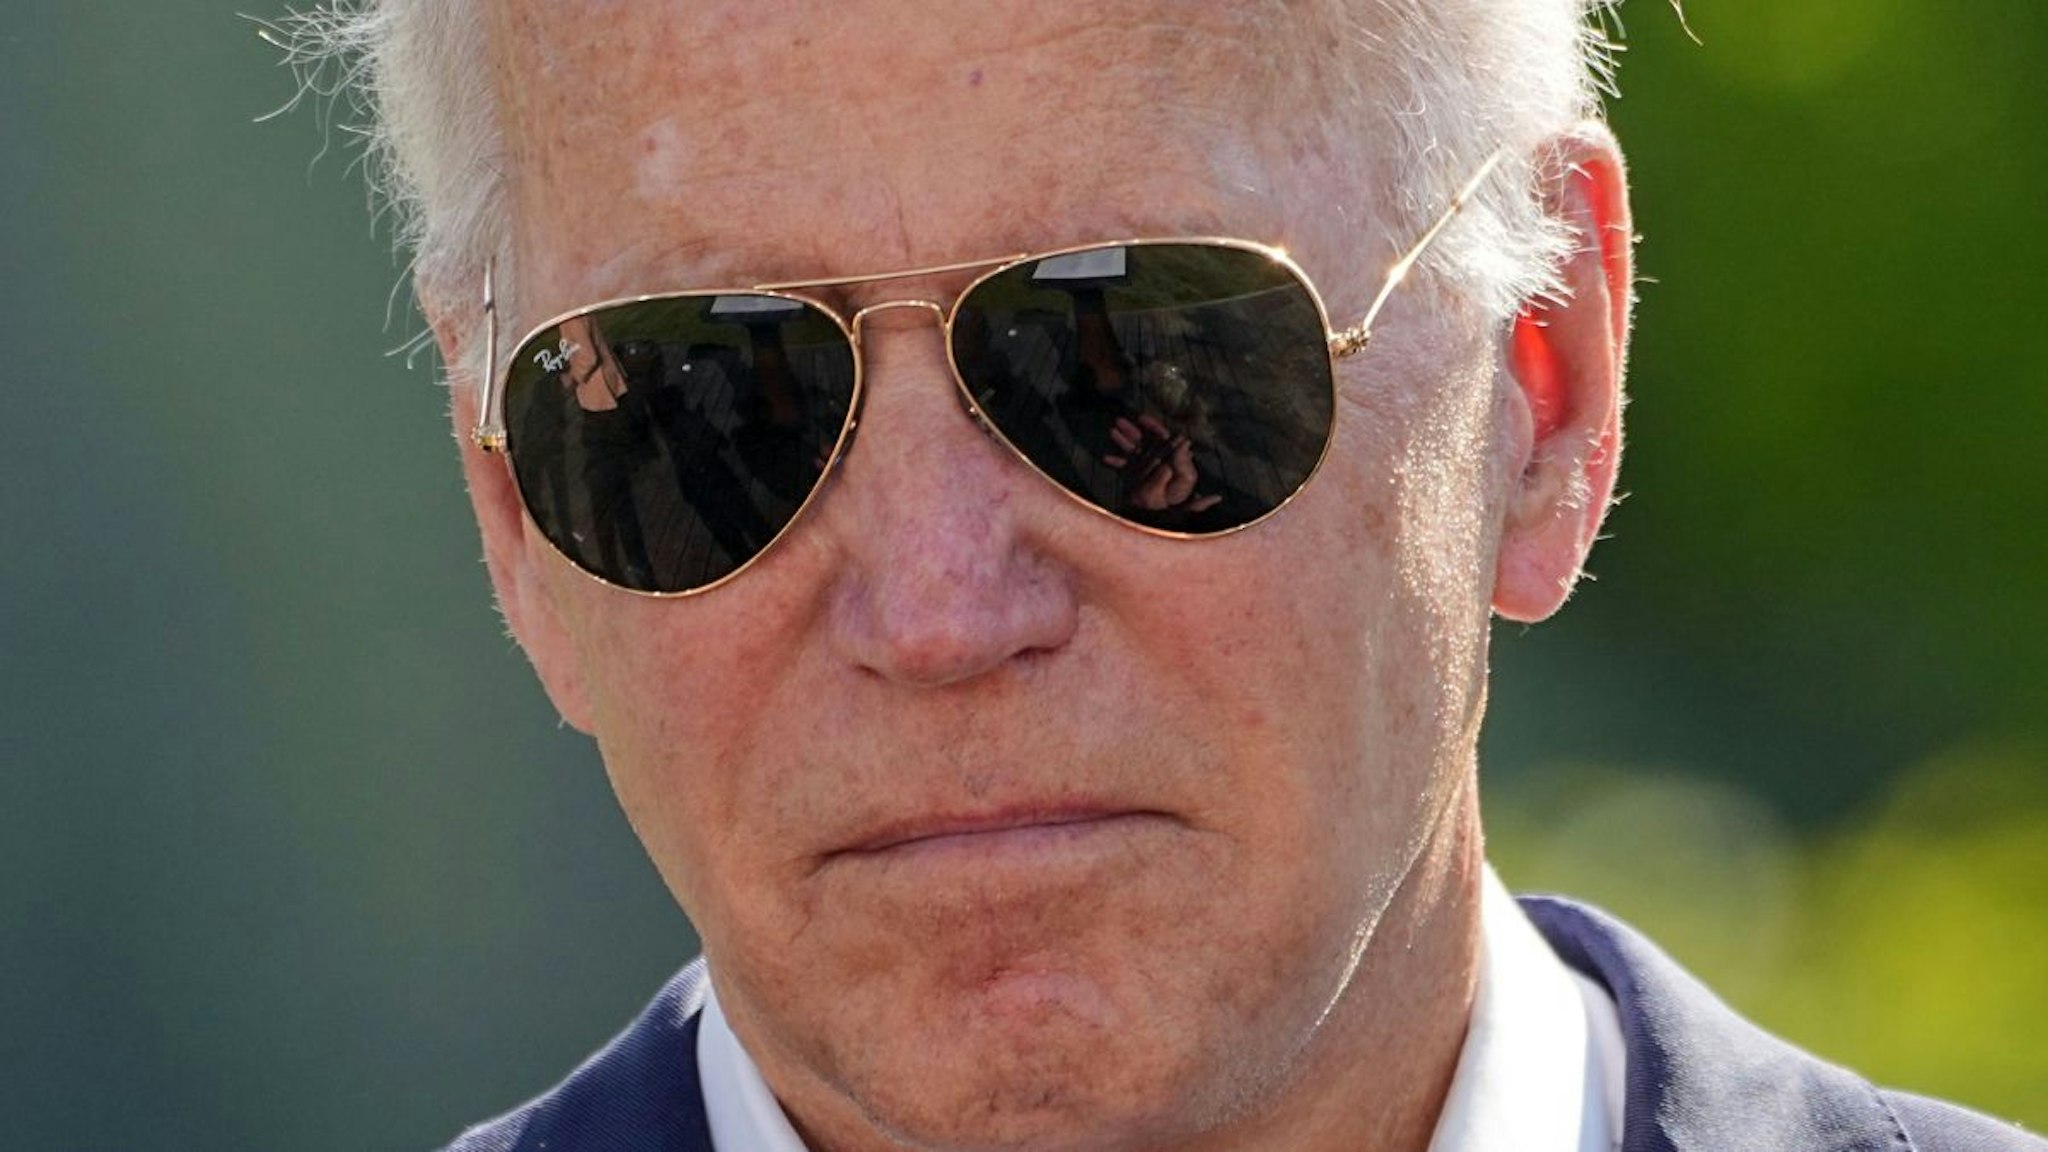 Joe Biden, President of the USA, wears sunglasses during a press statement on partnerships for global infrastructure and investment. Germany is hosting the G7 summit of economically strong democracies from June 26 to 28, 2022, at Schloss Elmau.